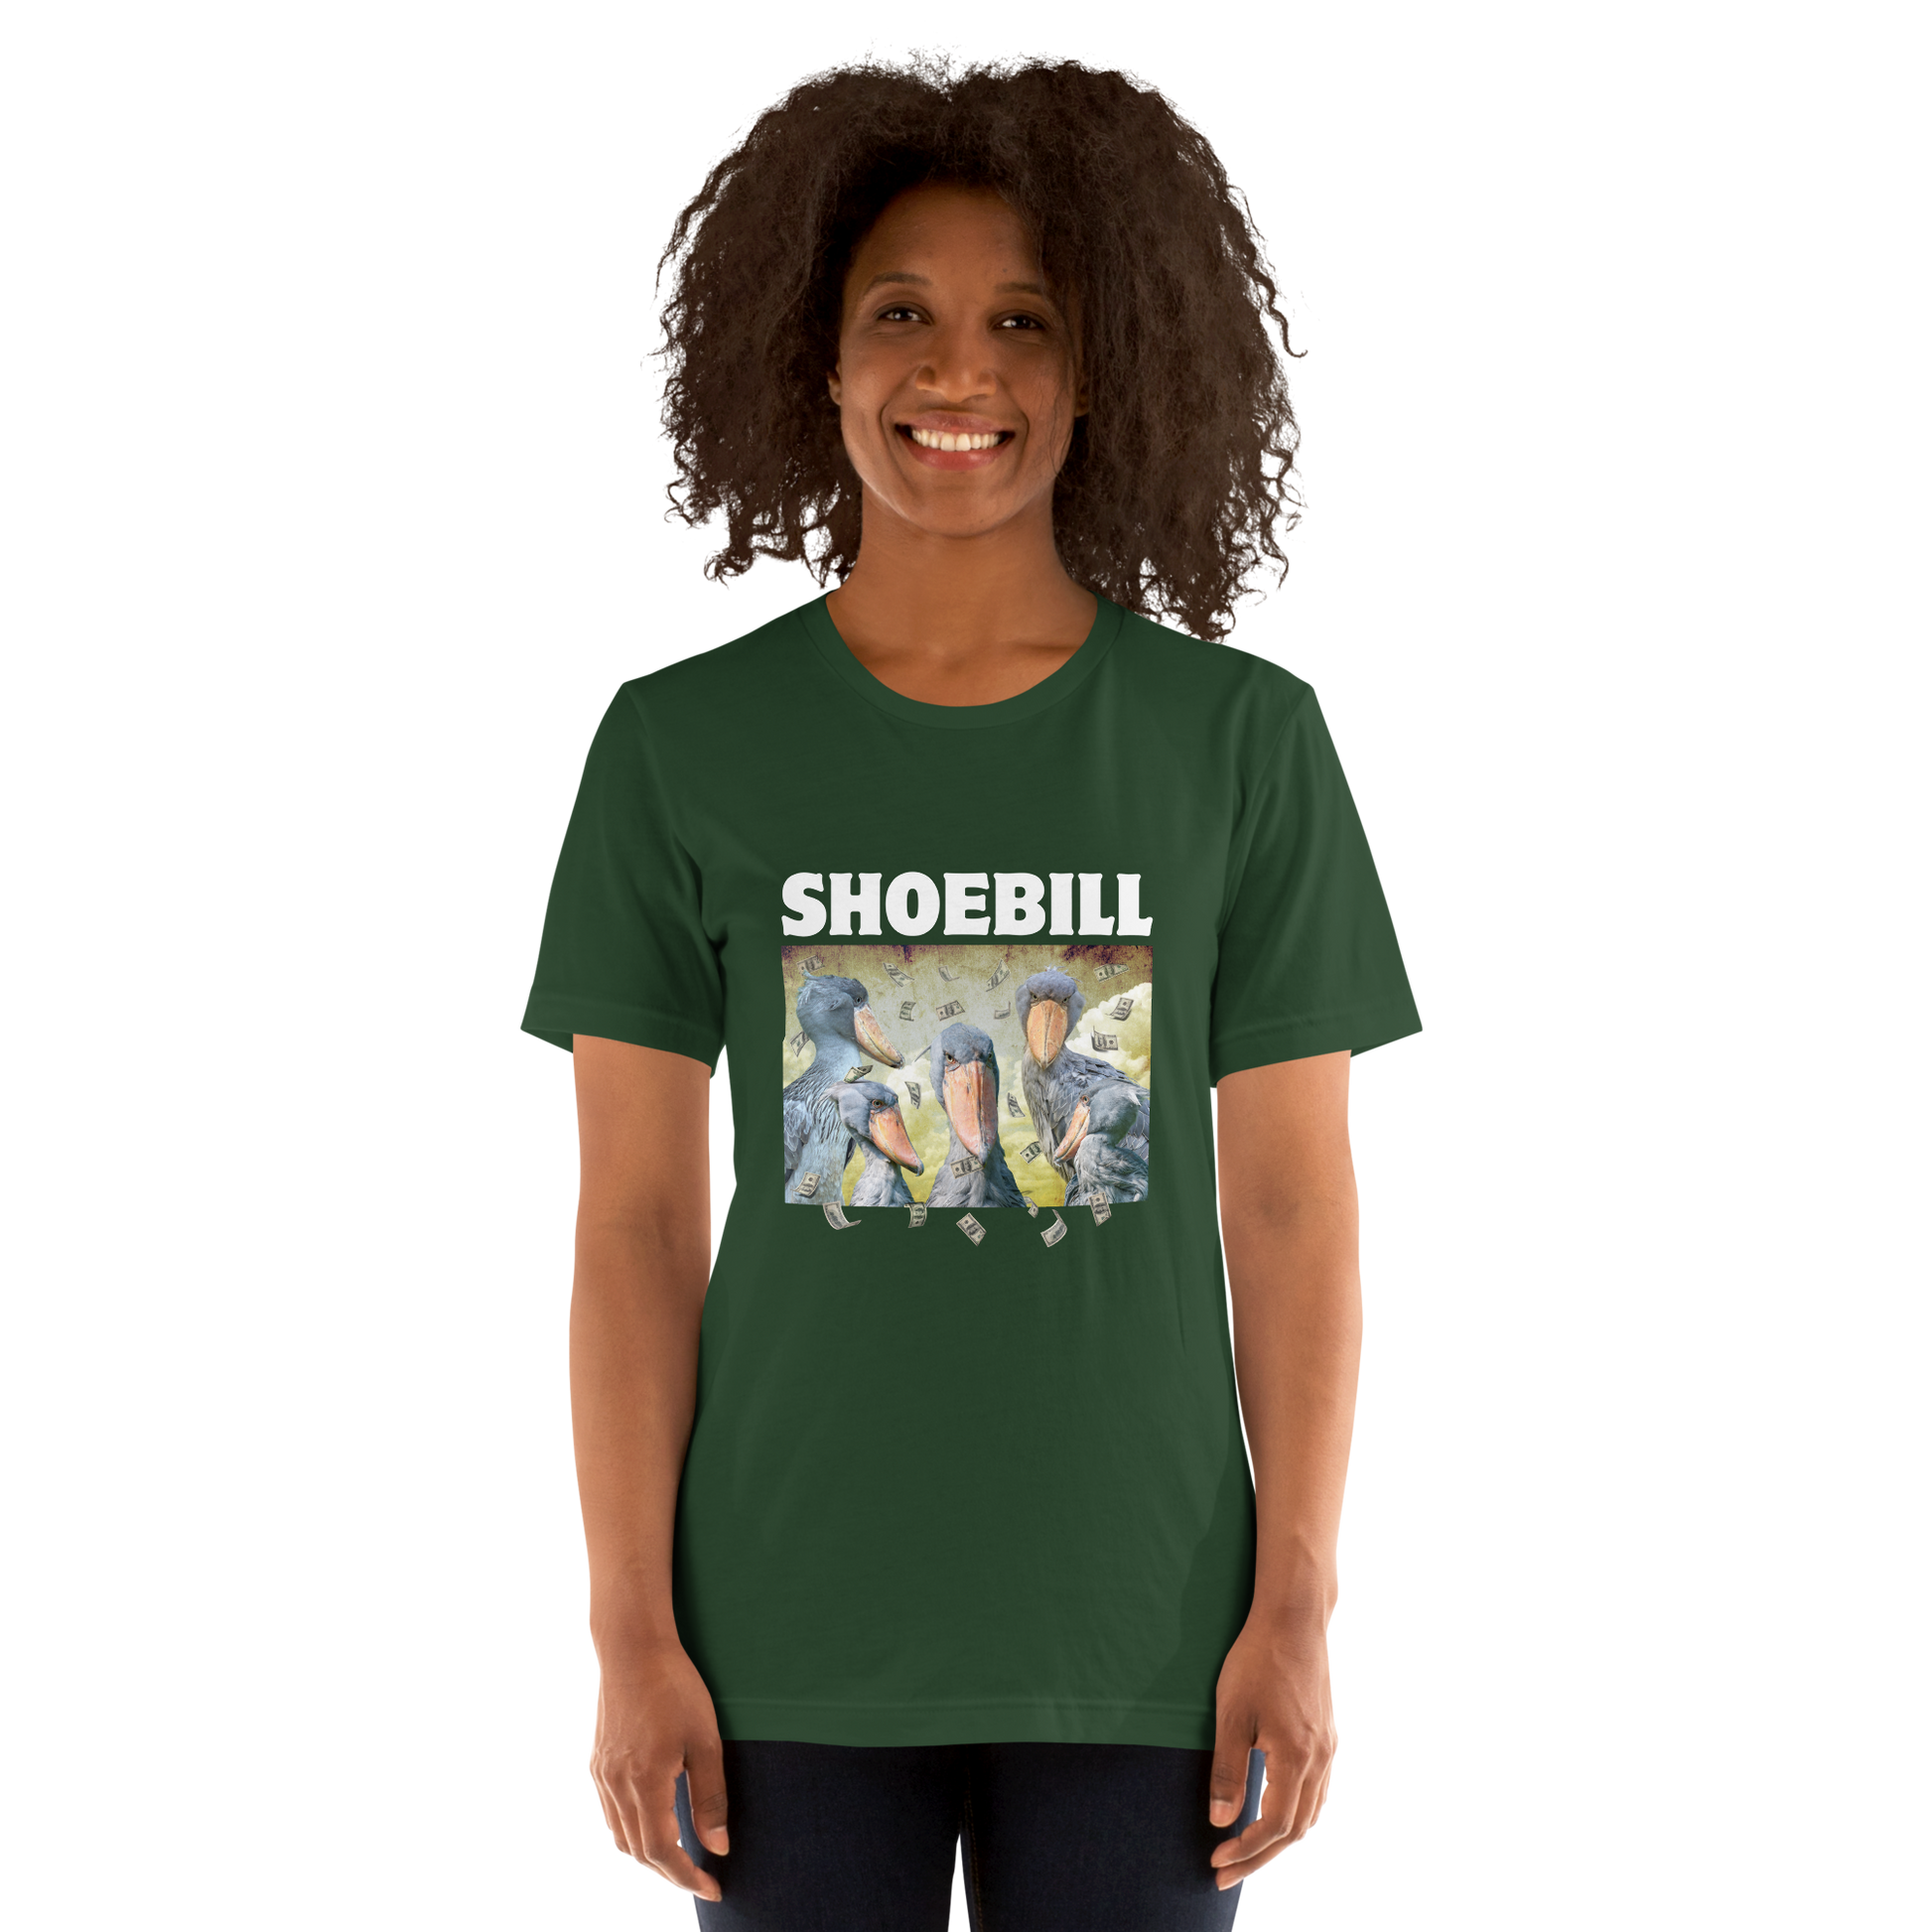 Woman wearing a Forest Green Premium Shoebill Tee featuring cool Shoebill graphic on the chest - Artsy/Funny Graphic Shoebill Stork Tees - Boozy Fox